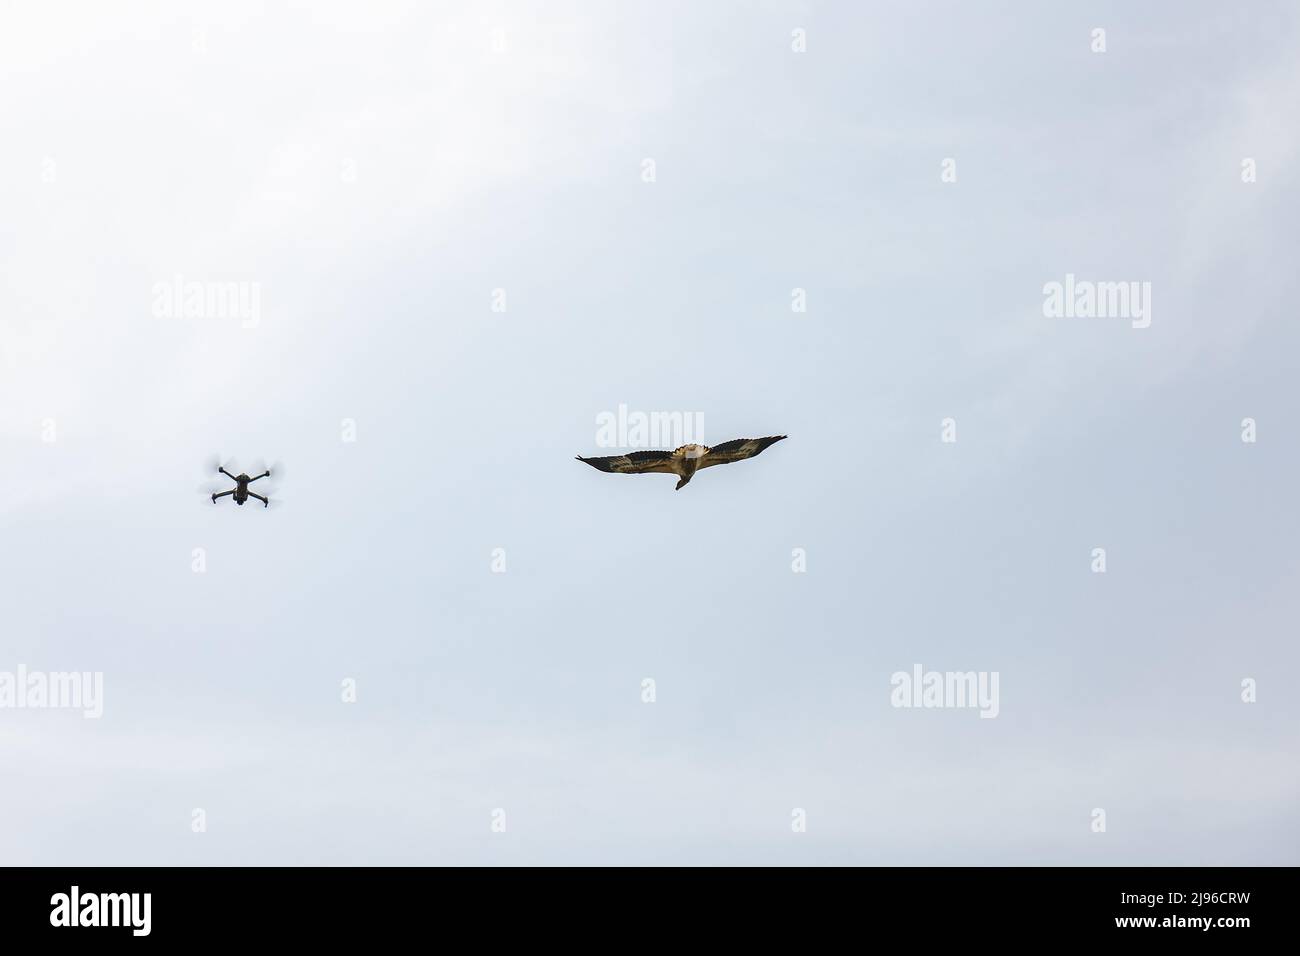 An Eagle about to attack a flying drone camera Stock Photo